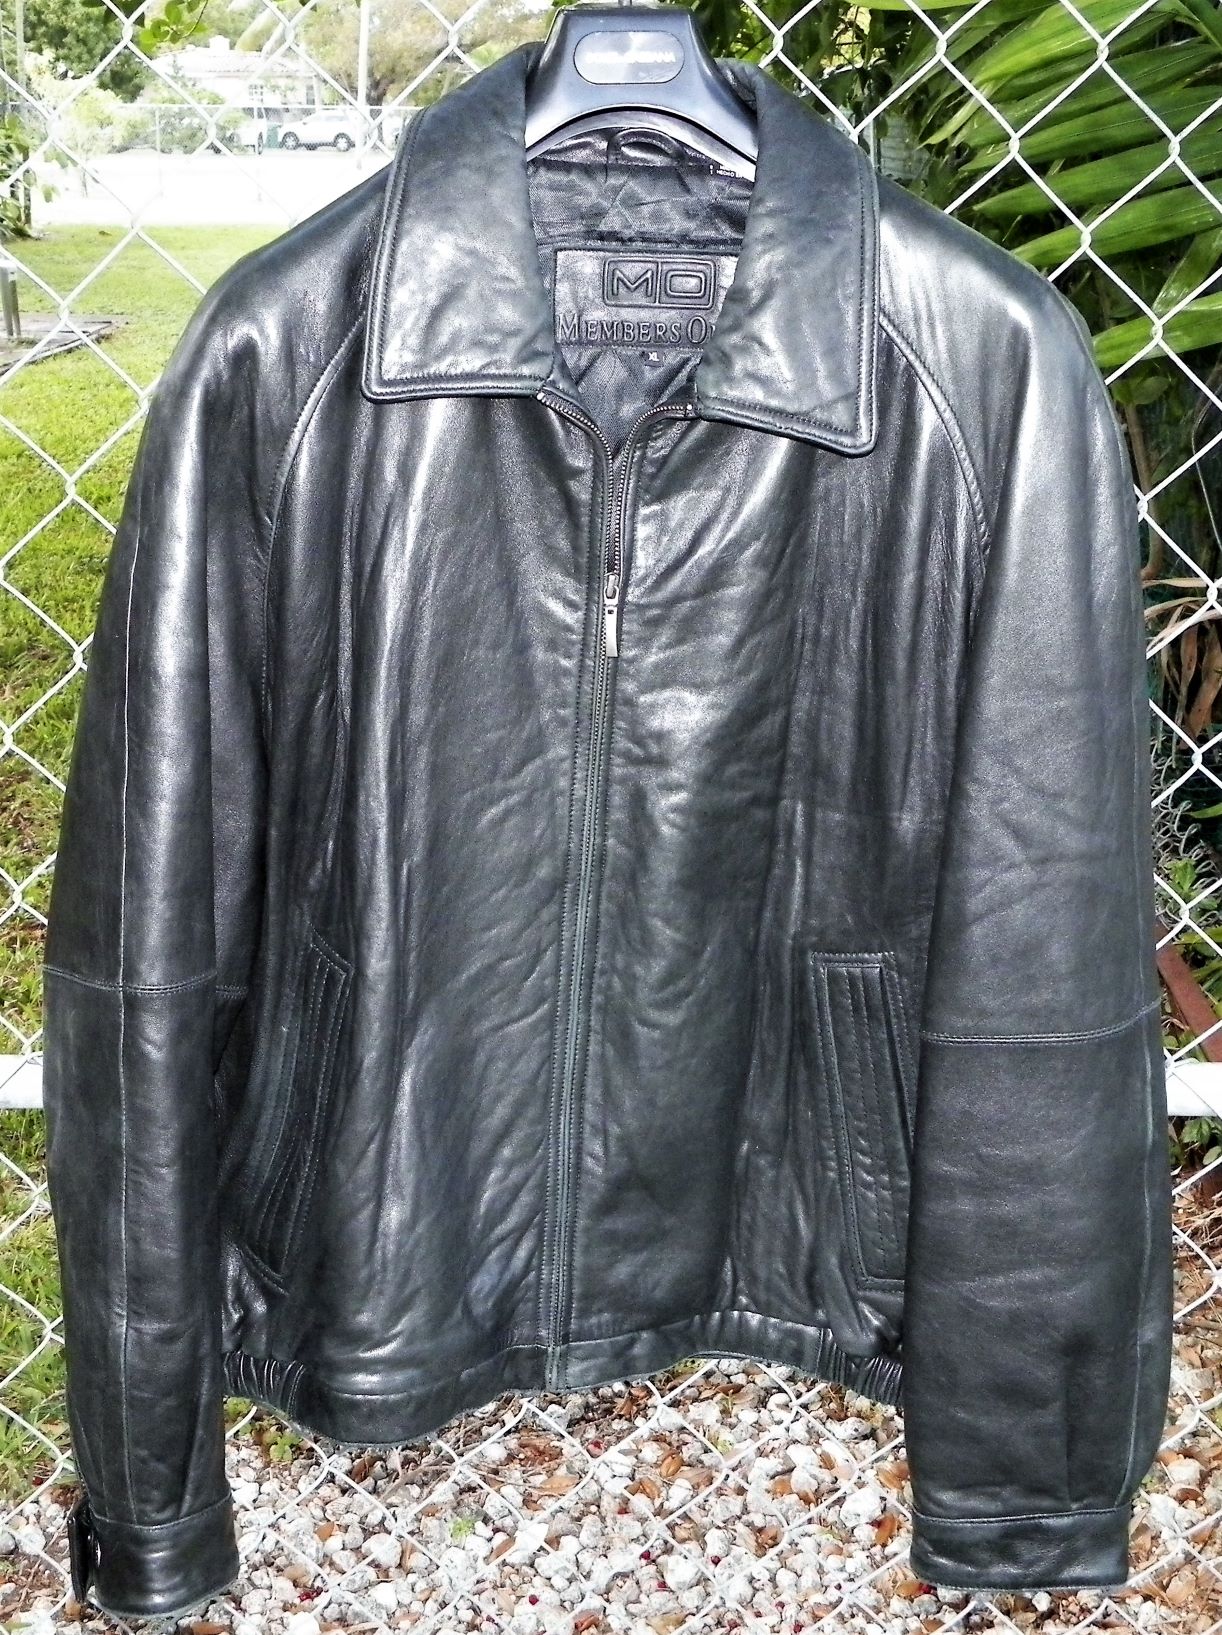 CLOTHES JACKET MEMBERS ONLY LEATHER 1AA.JPG